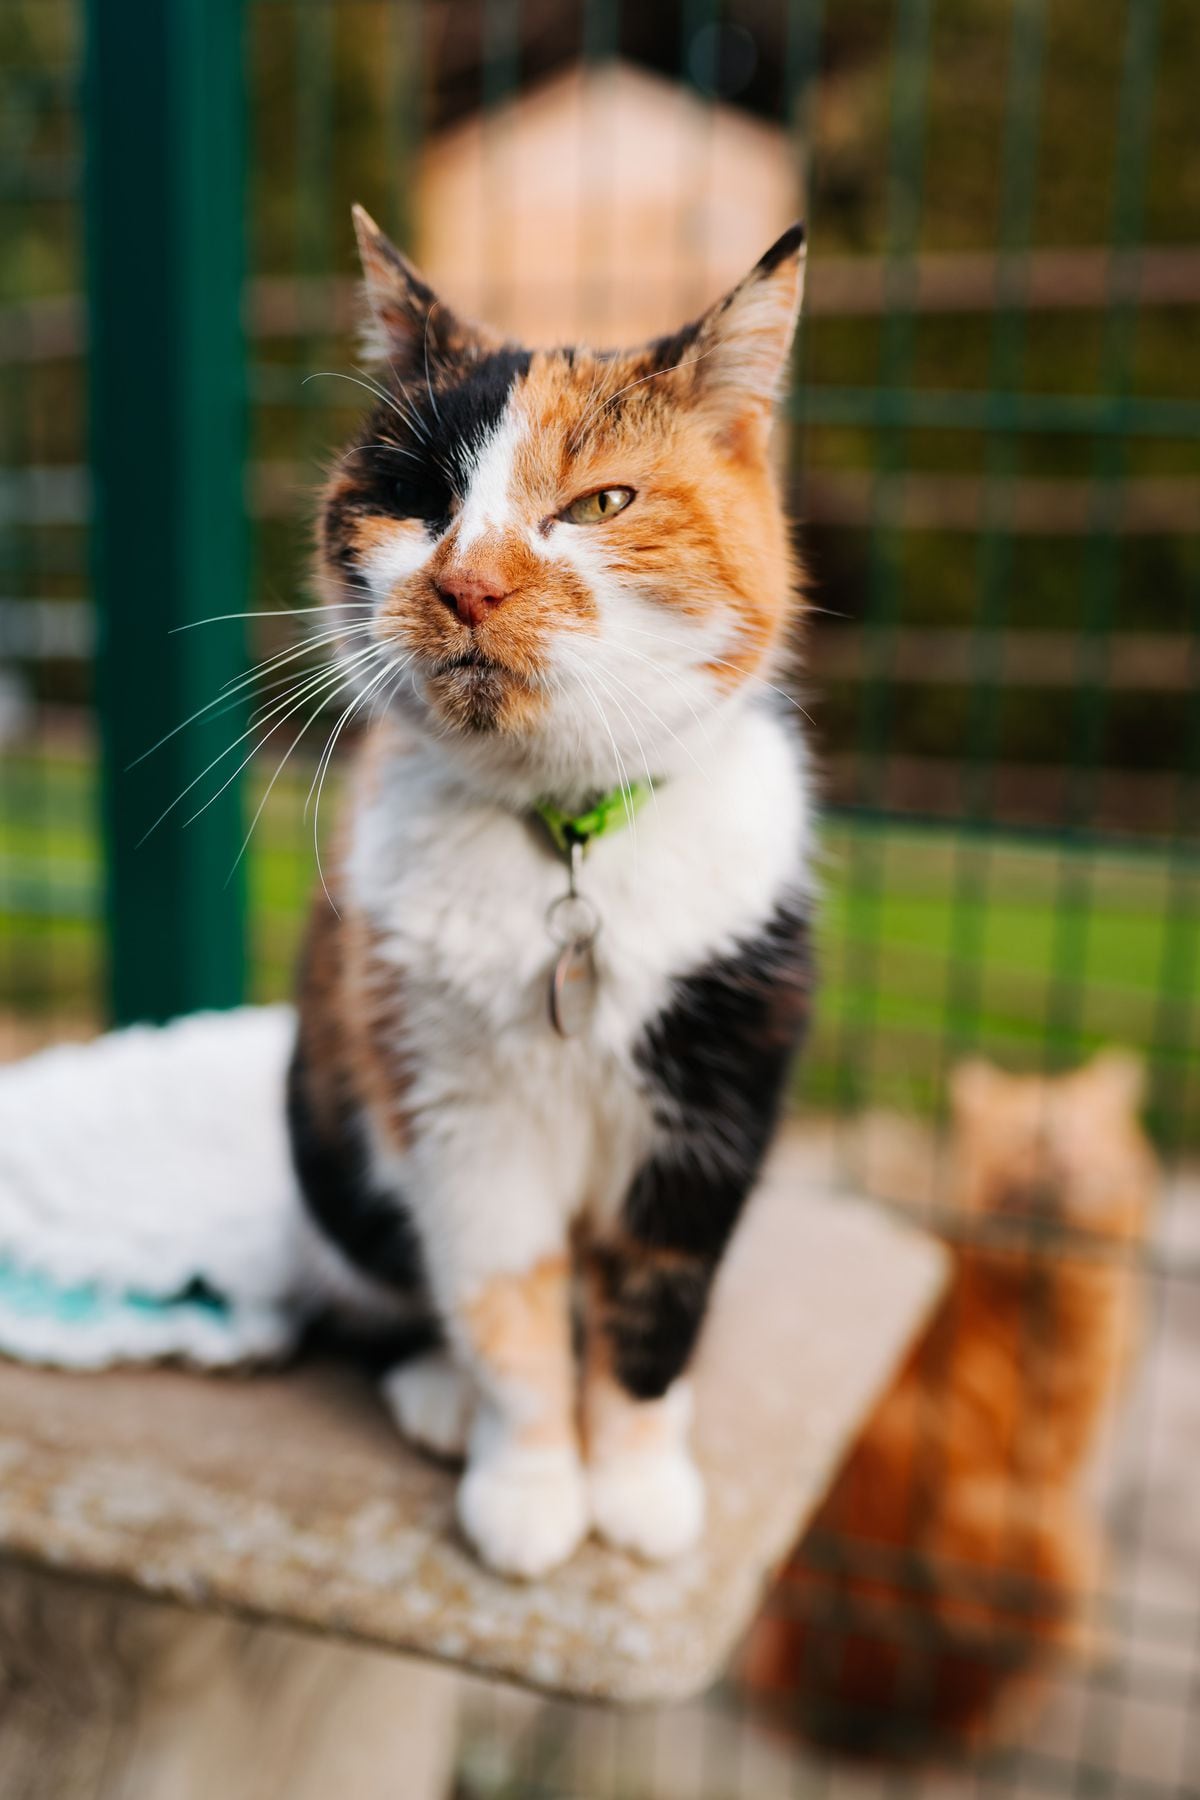 Shropshire Cat Rescue, based out of Shrewsbury, celebrate the birthday of their oldest resident, Molly, as she turns 22 years old